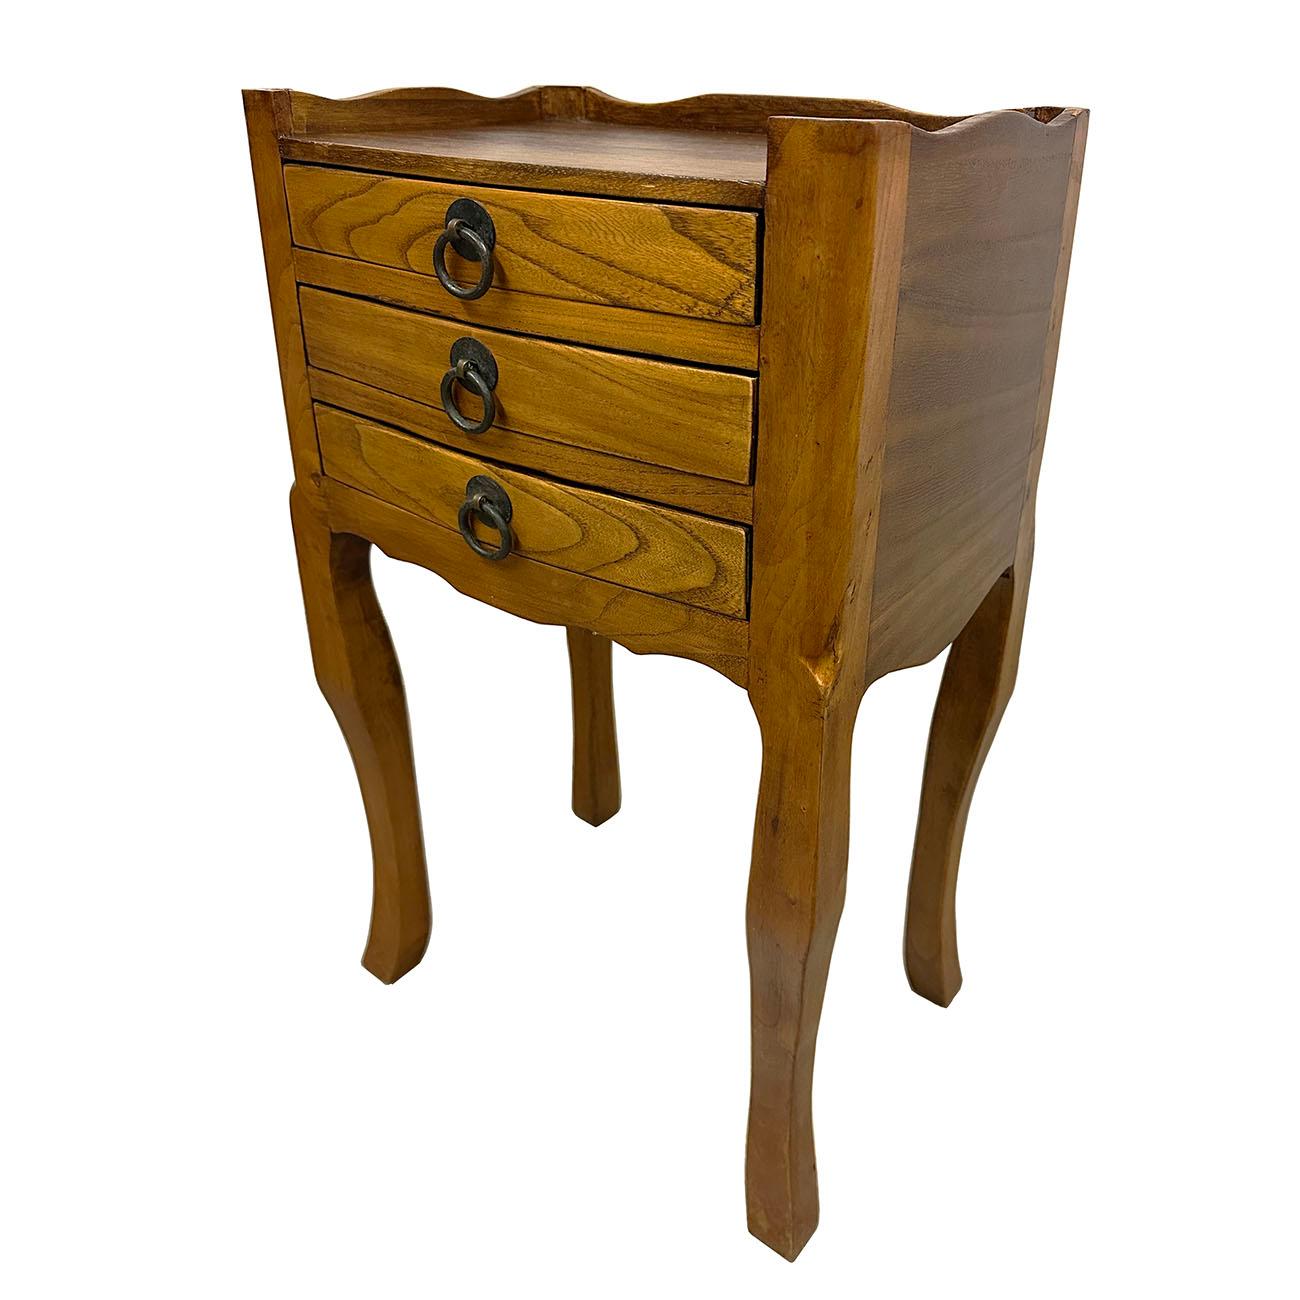 This beautiful nightstand is handmade and hand carved. Very sturdy. It has three drawers on the front letting you store your stuffs. Very simple and elegant design. From the pictures, you can see it is in very good condition with normal age